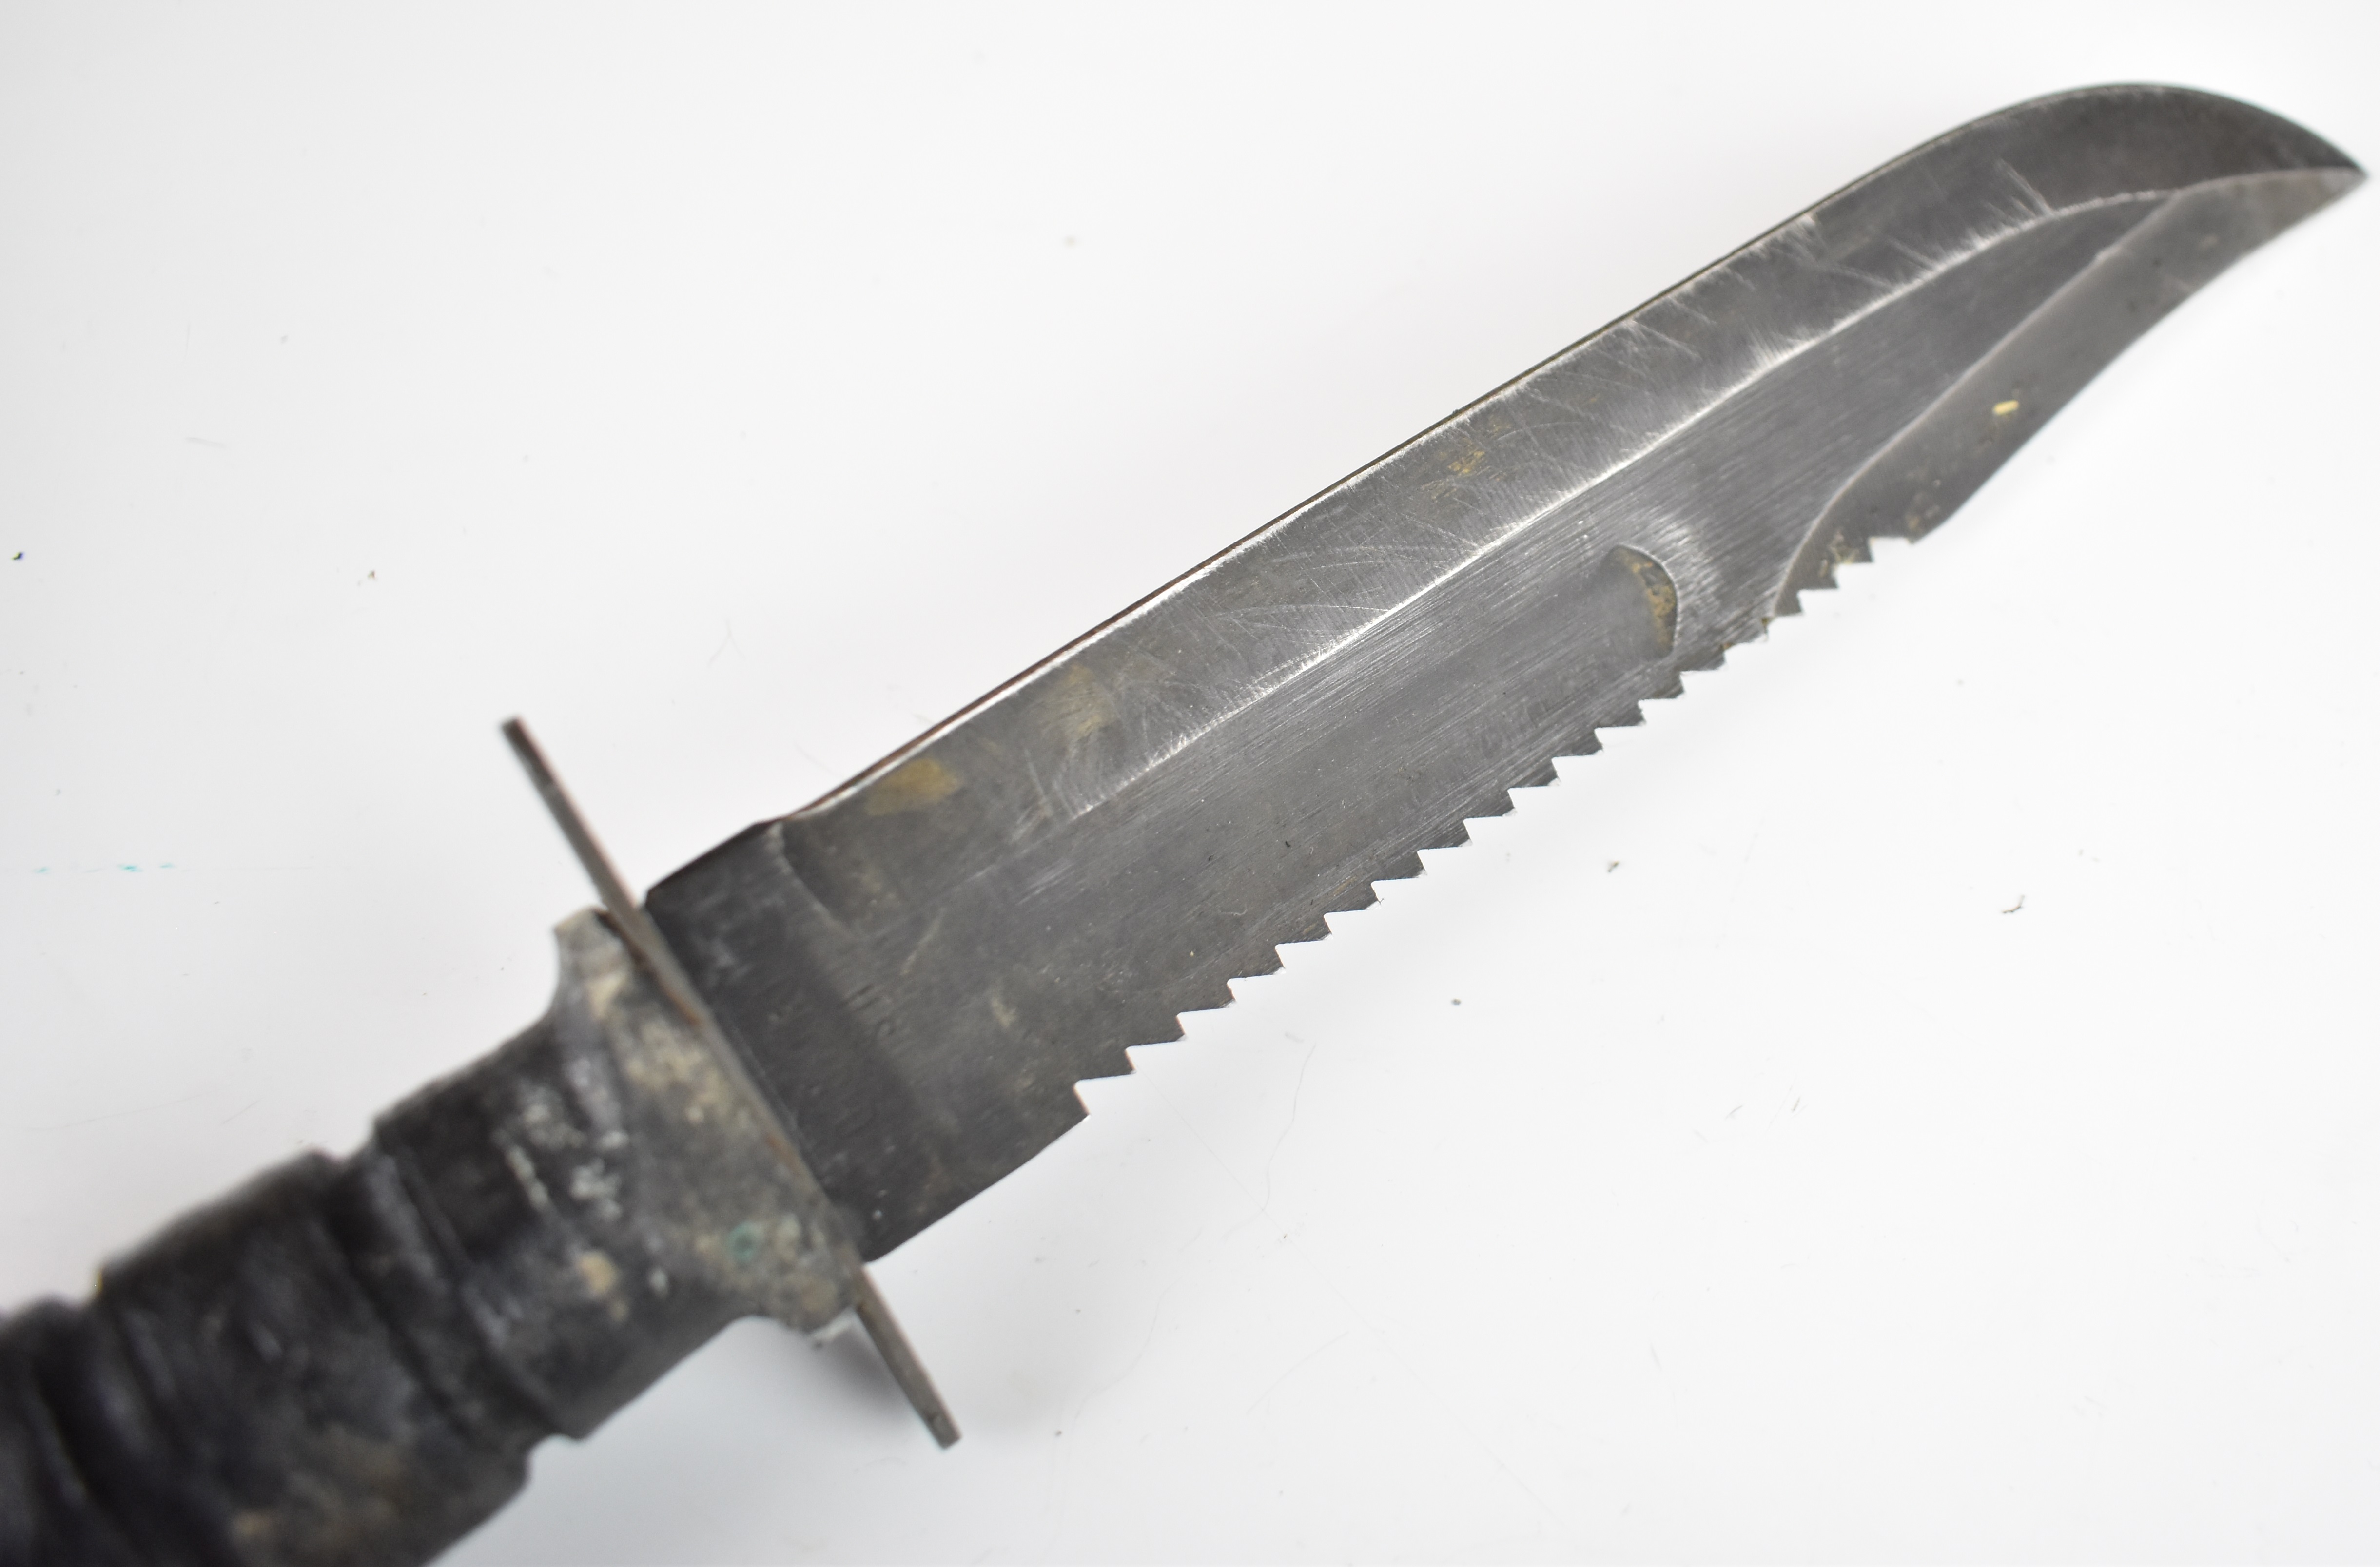 Kalashnikov AK47 bayonet with composite grips stamped 689, 14cm part serrated blade and scabbard, - Image 4 of 10